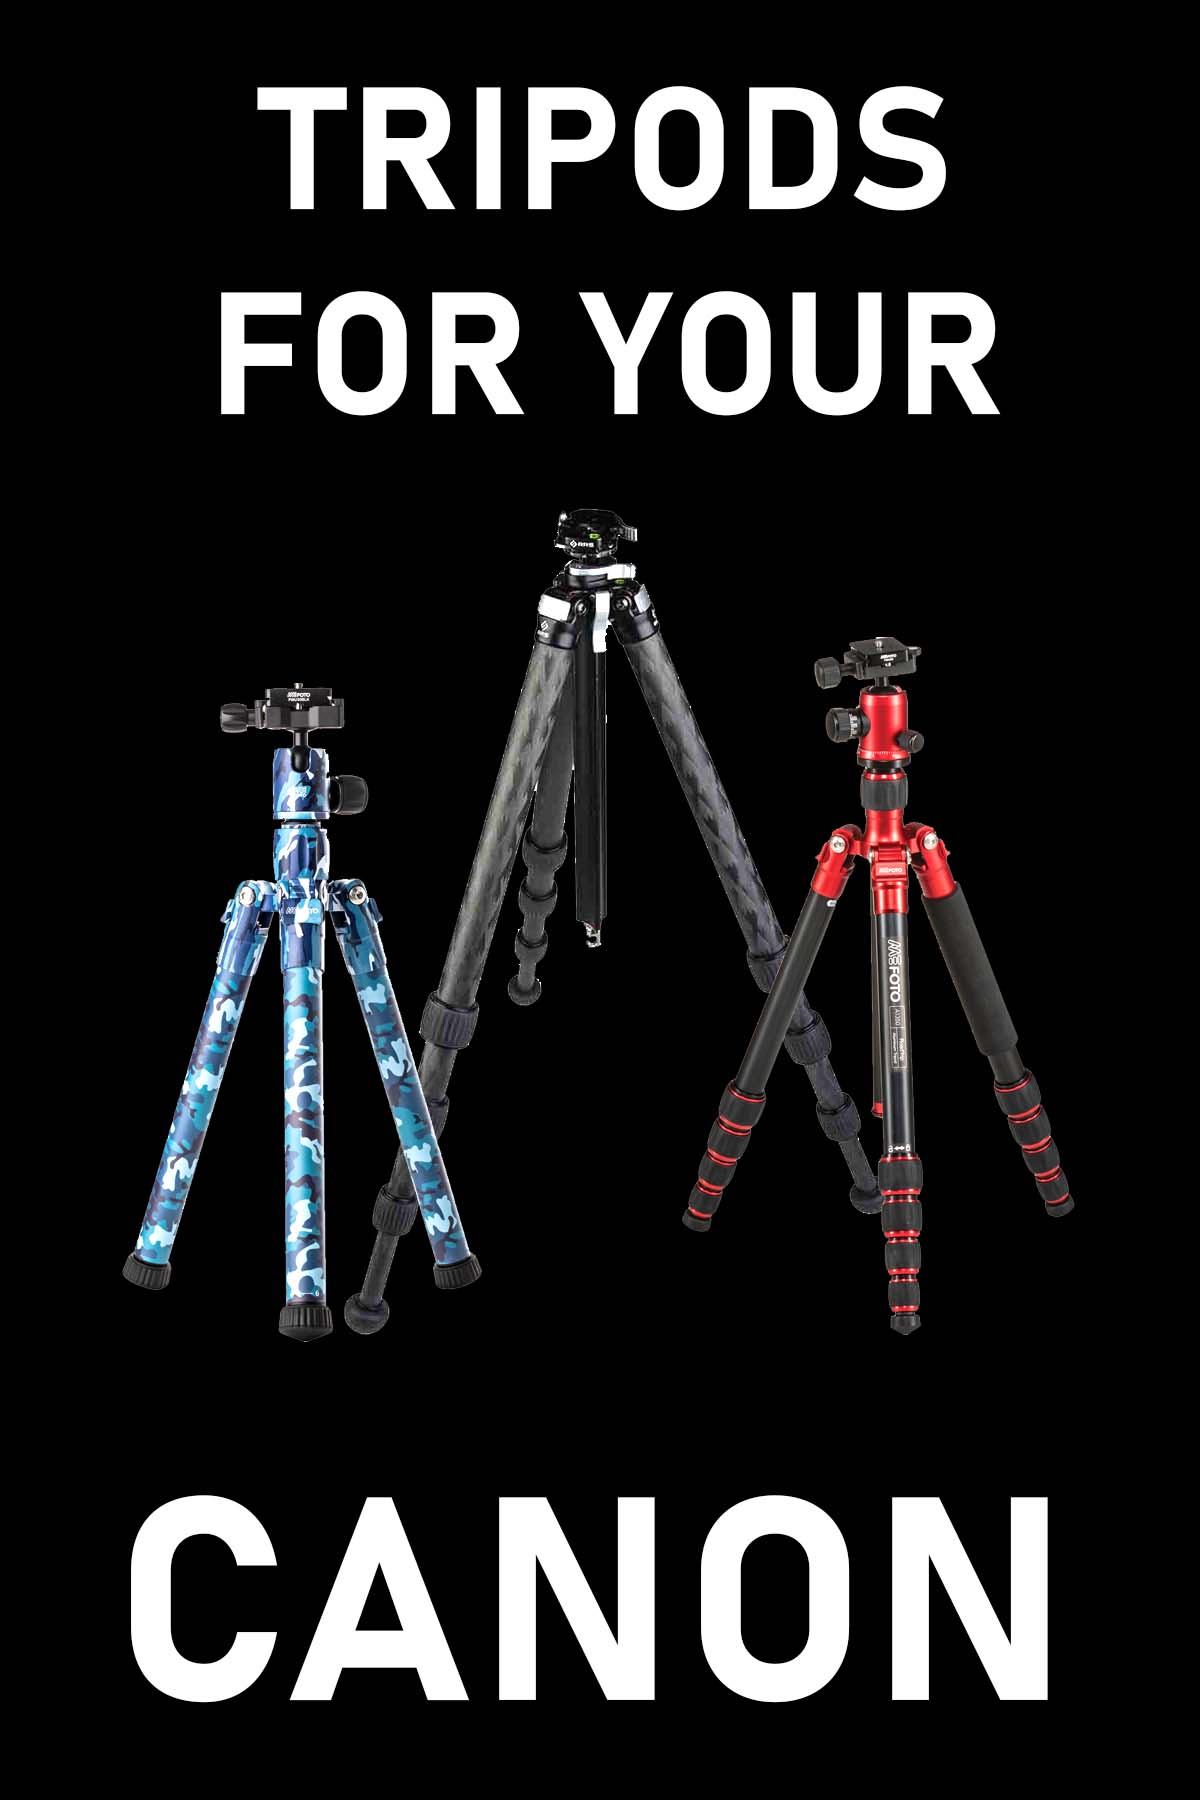 Are the Canon tripods any good? Can you abandon your loyalty to Canon  when it comes to getting a tripod for your Canon camera?